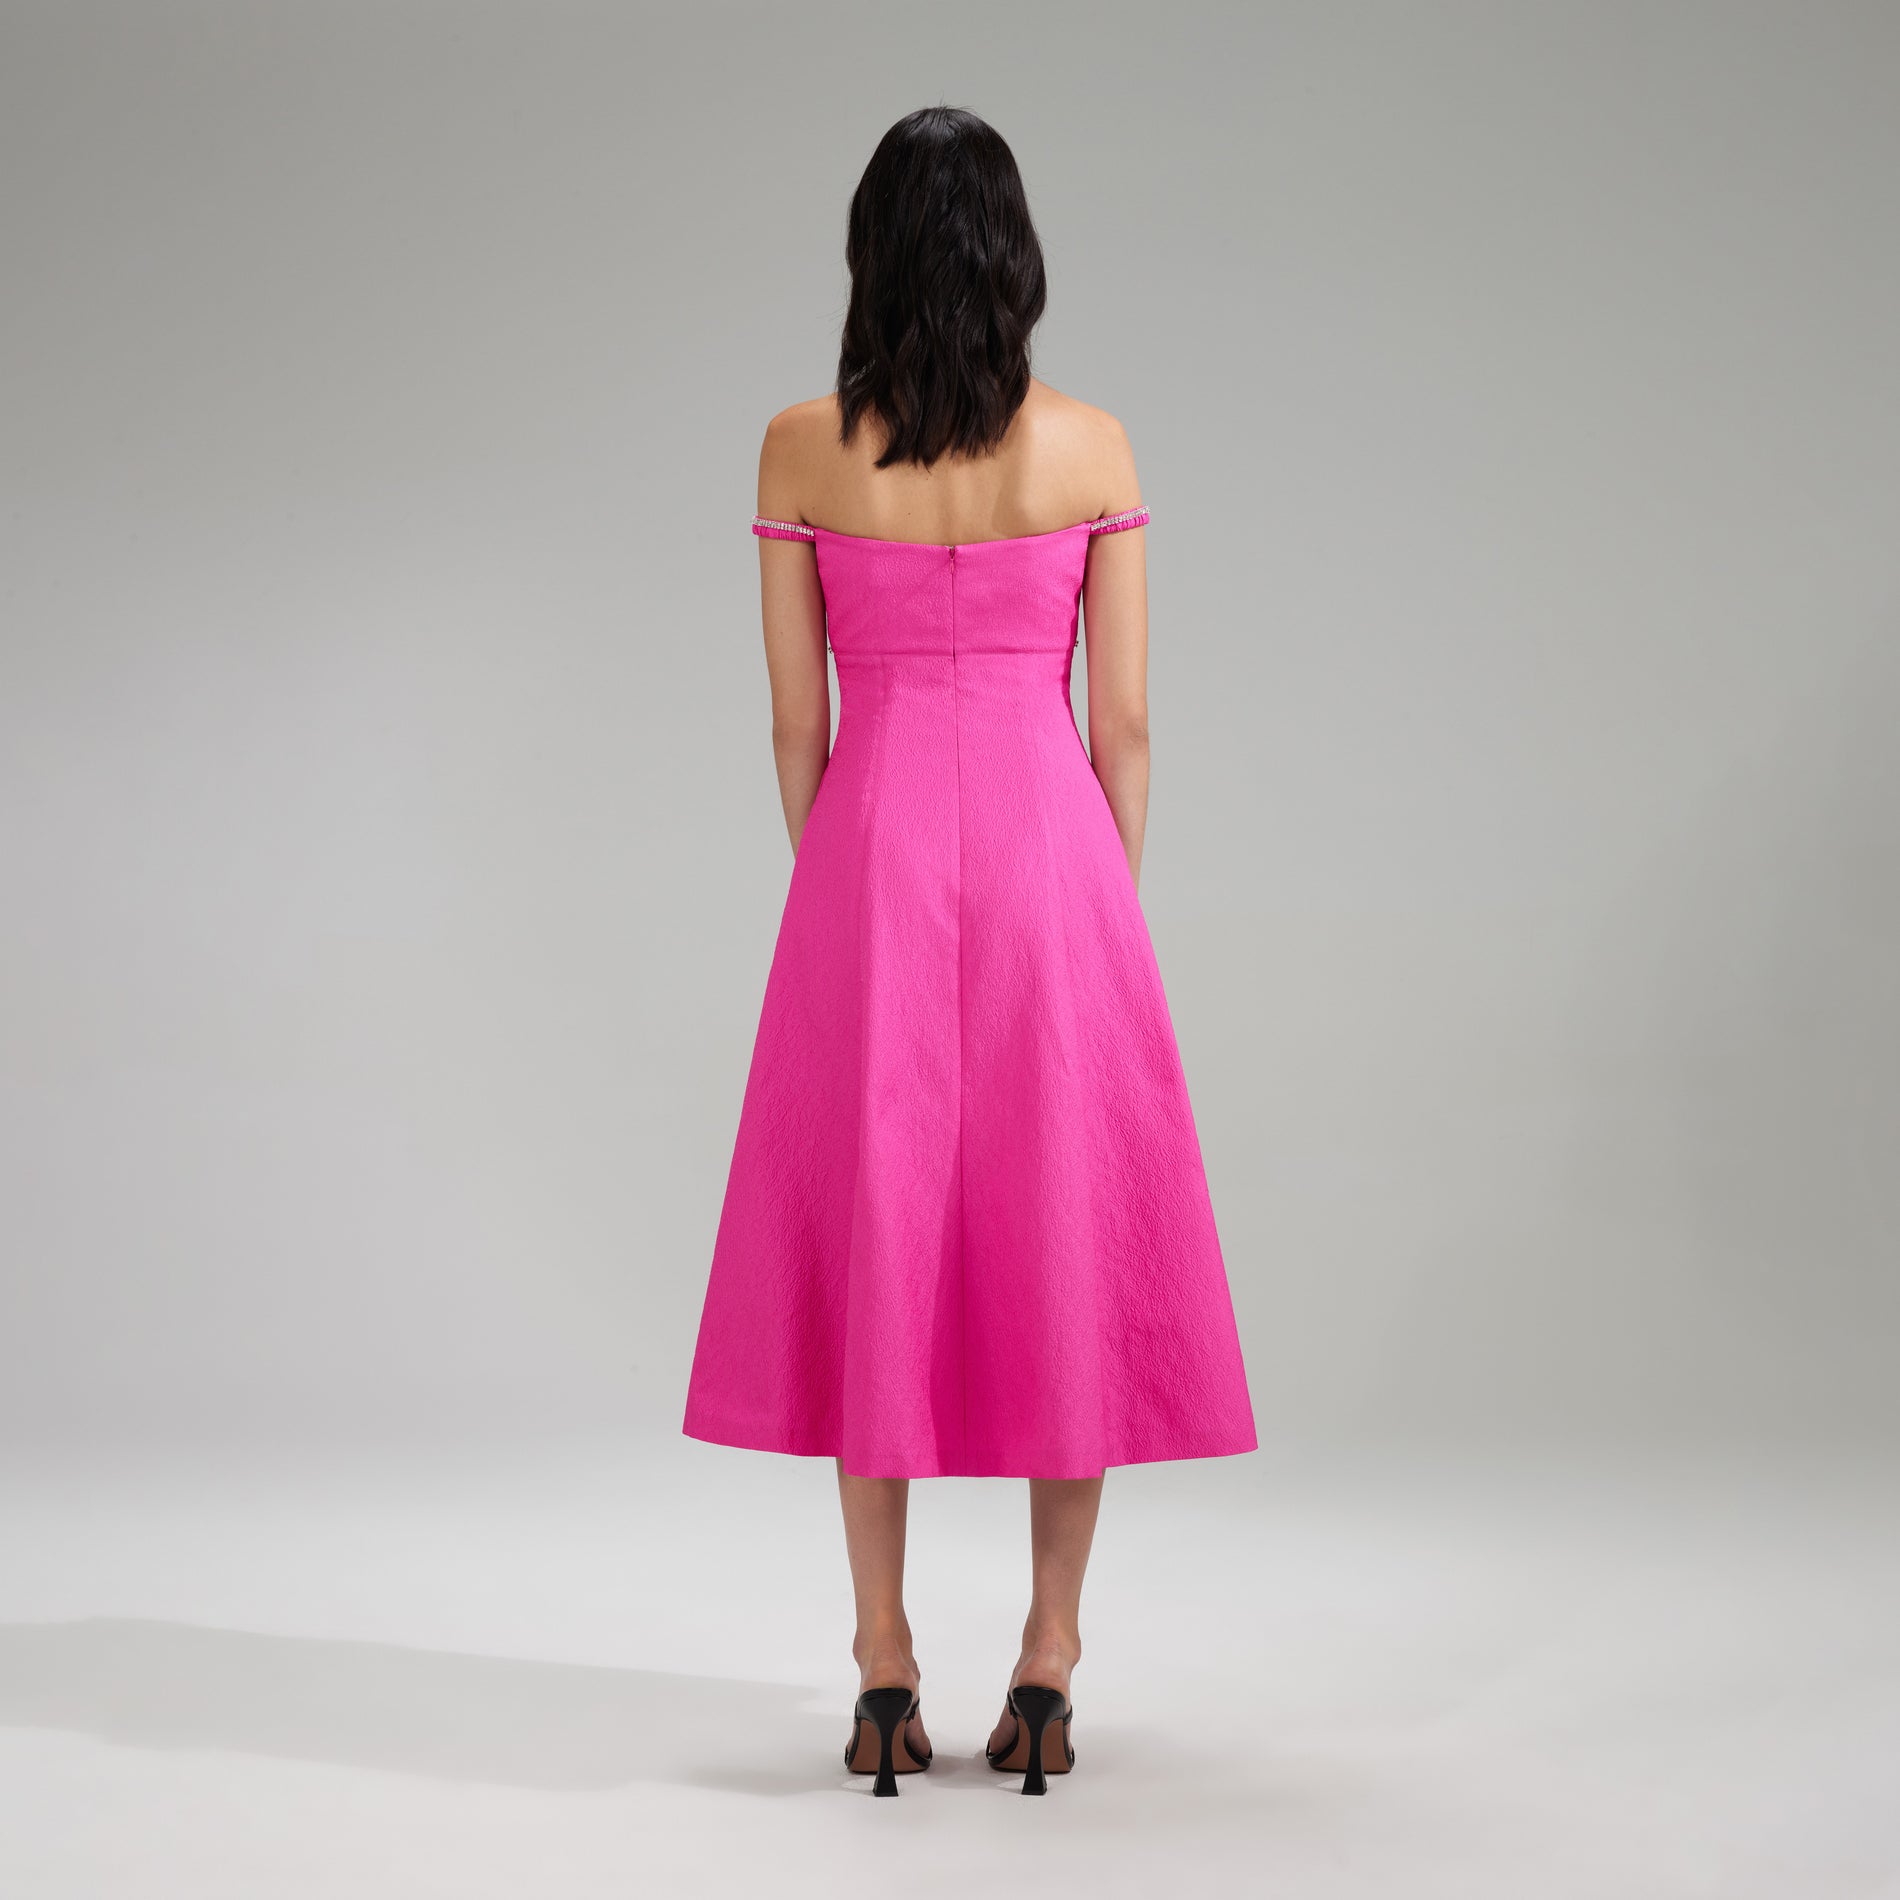 A woman wearing the Pink Textured Diamante Detail Midi Dress